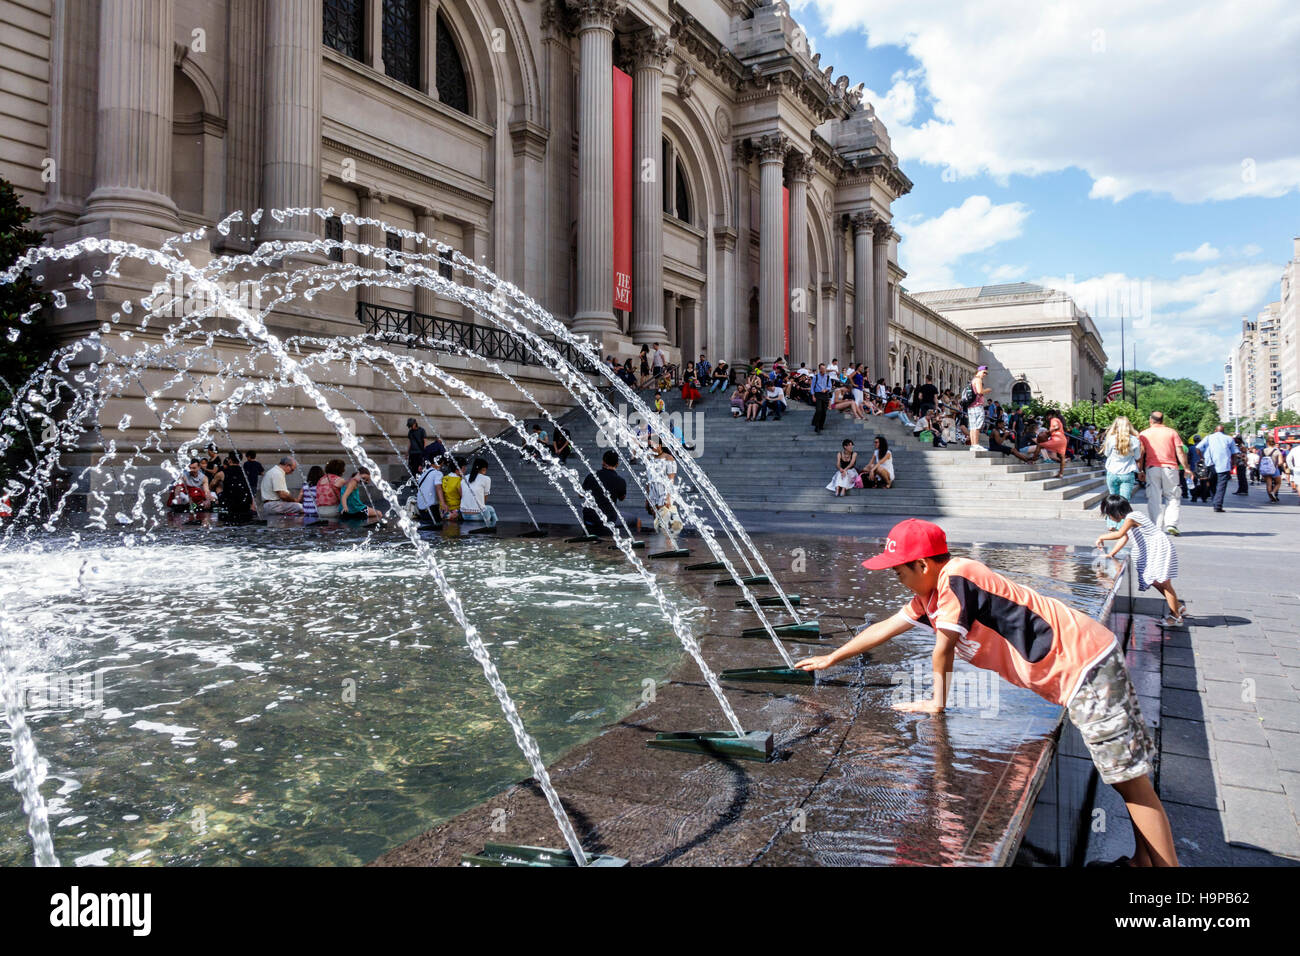 New York City,NY NYC Manhattan,Upper East Side,Fifth Avenue,Metropolitan Museum of Art,met,front,exterior,main entrance,fontana,scale scalini scalinate Foto Stock